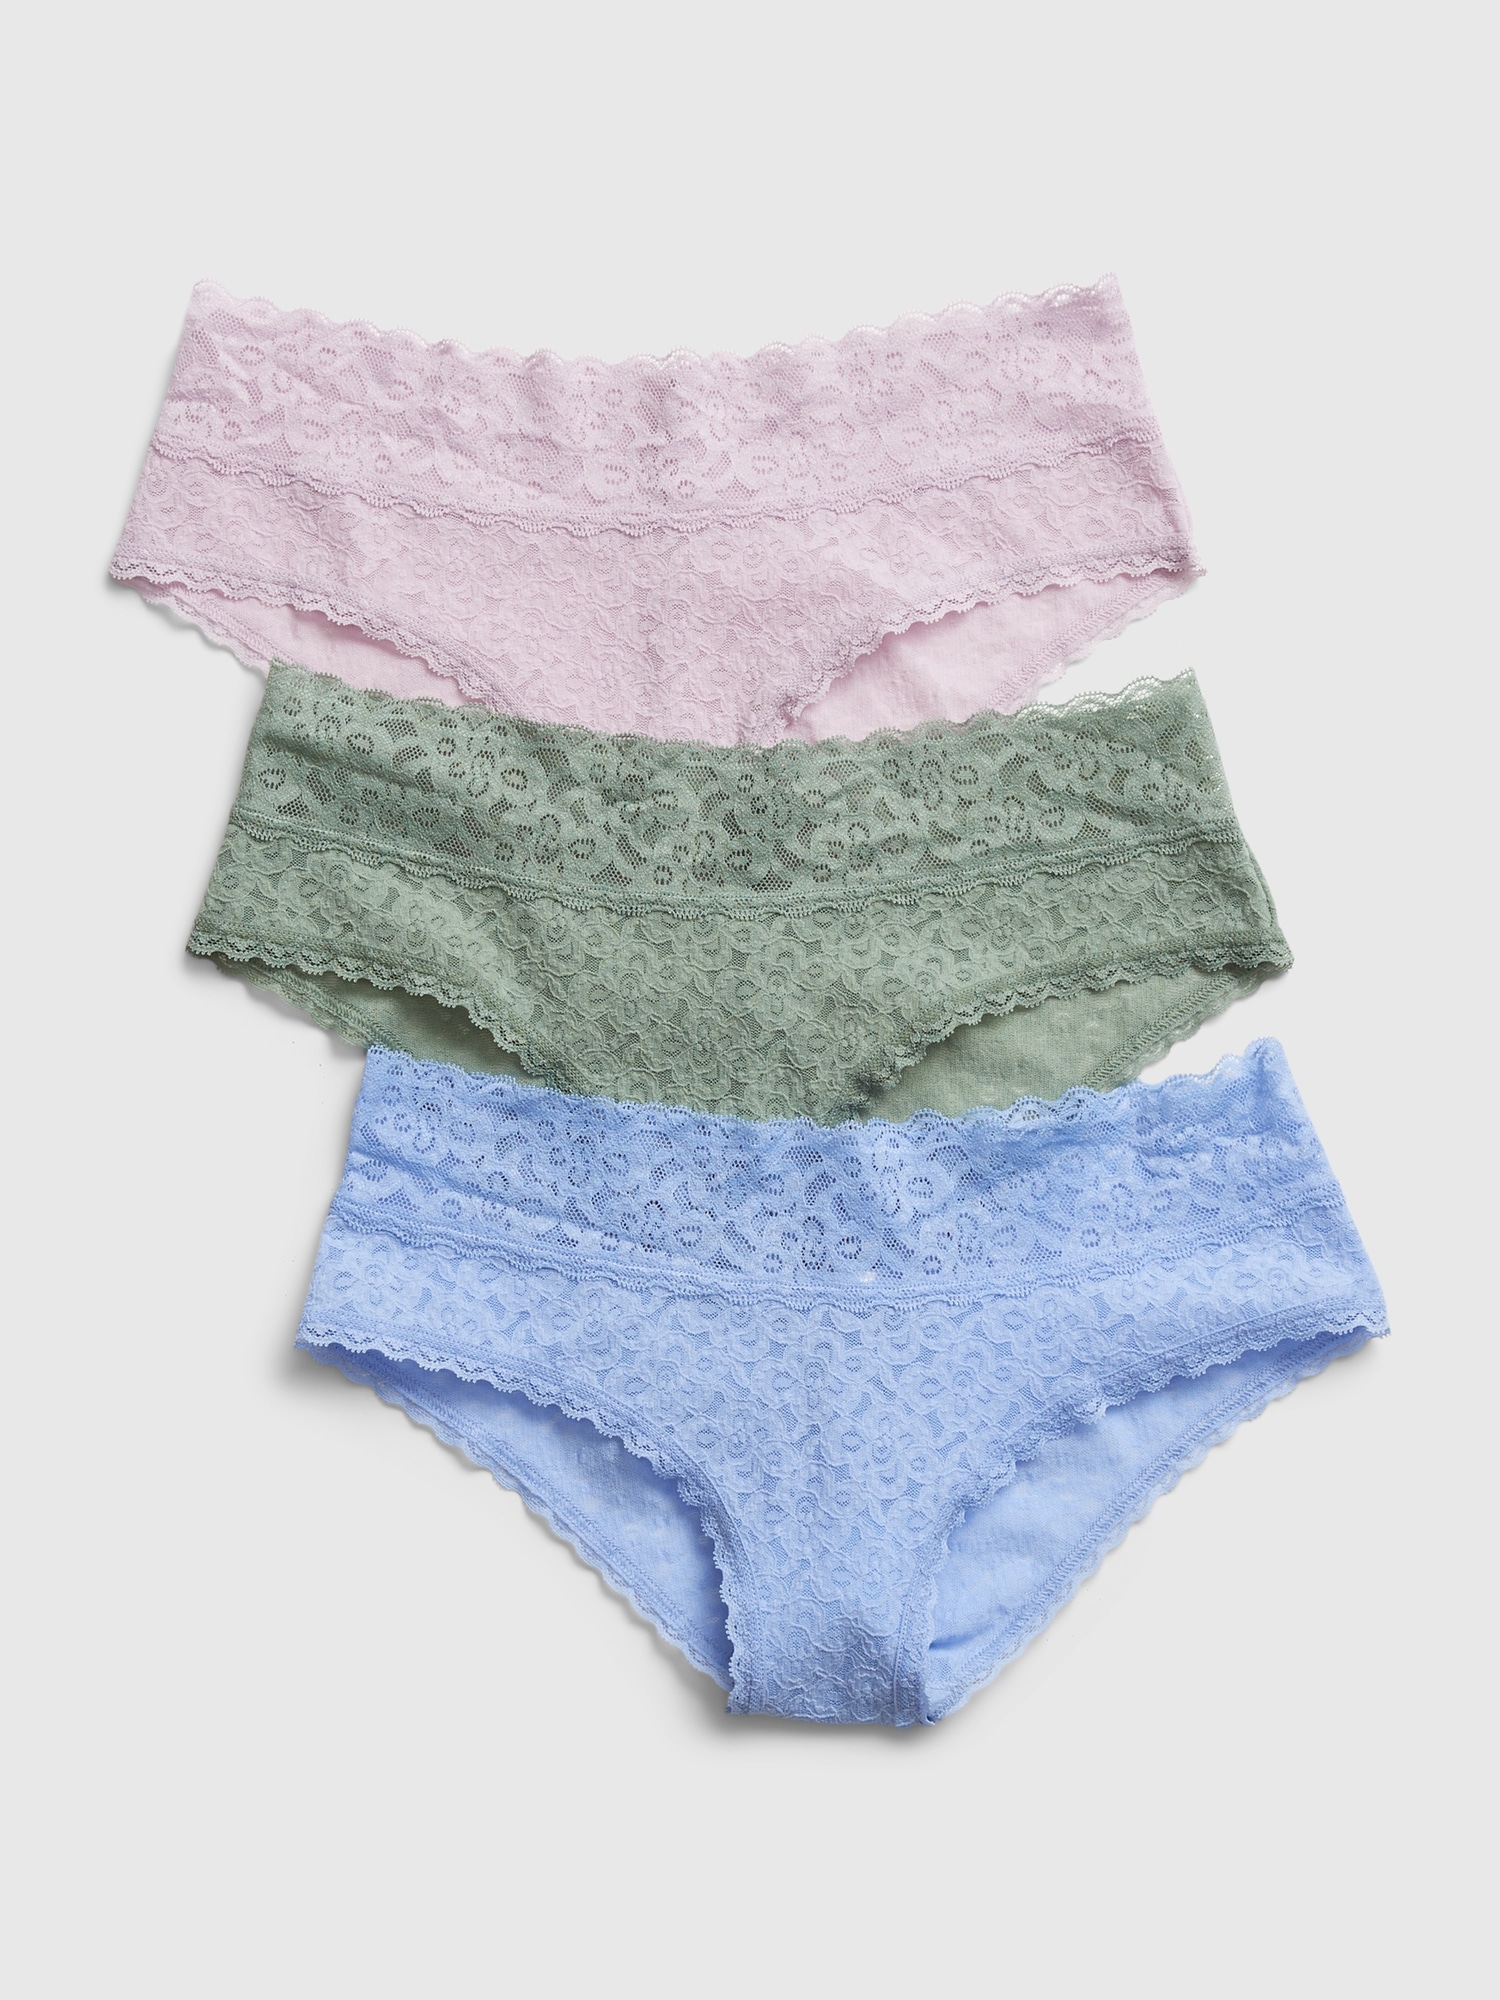 HOPE - Lace Microfiber Cheeky Style Lingerie 3 Pack - Panties for